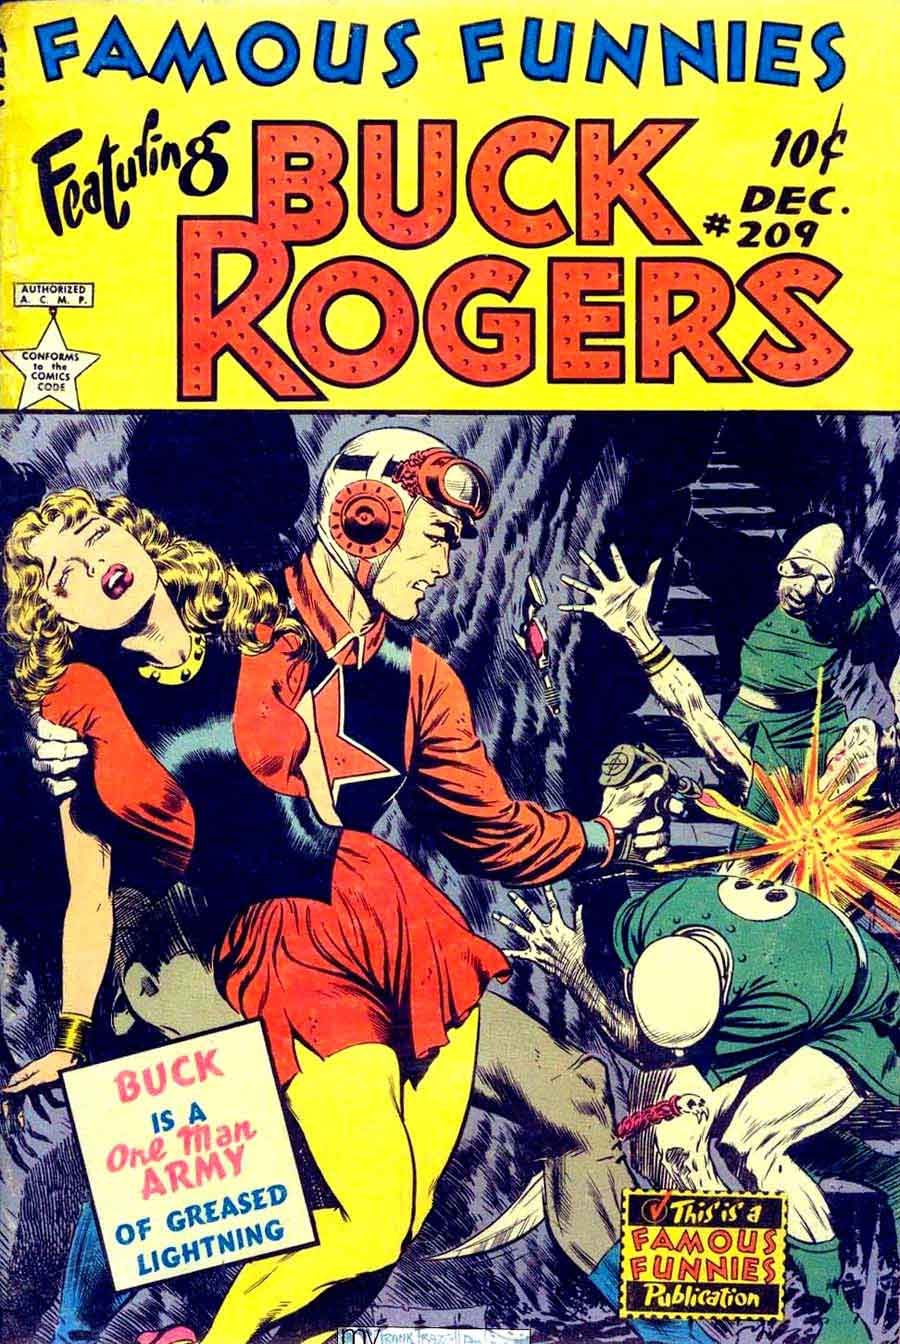 Frank Frazetta Buck Rogers 1950s golden age science fiction comic book cover / Famous Funnies #209